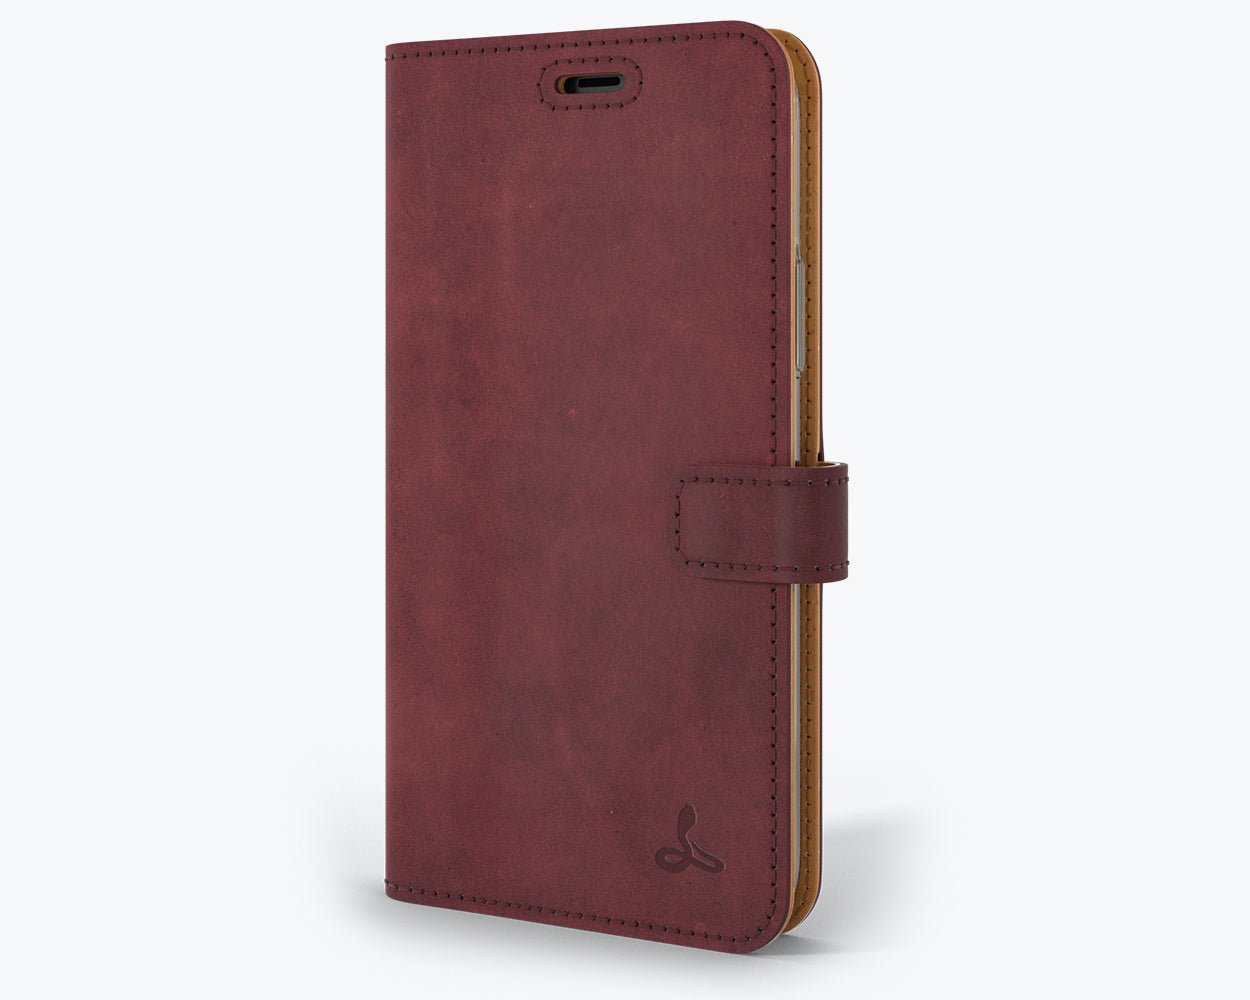 Apple iPhone 11 Pro Max - Vintage Leather Wallet (Almost Perfect) Plum Apple iPhone 11 Pro Max - Snakehive UK